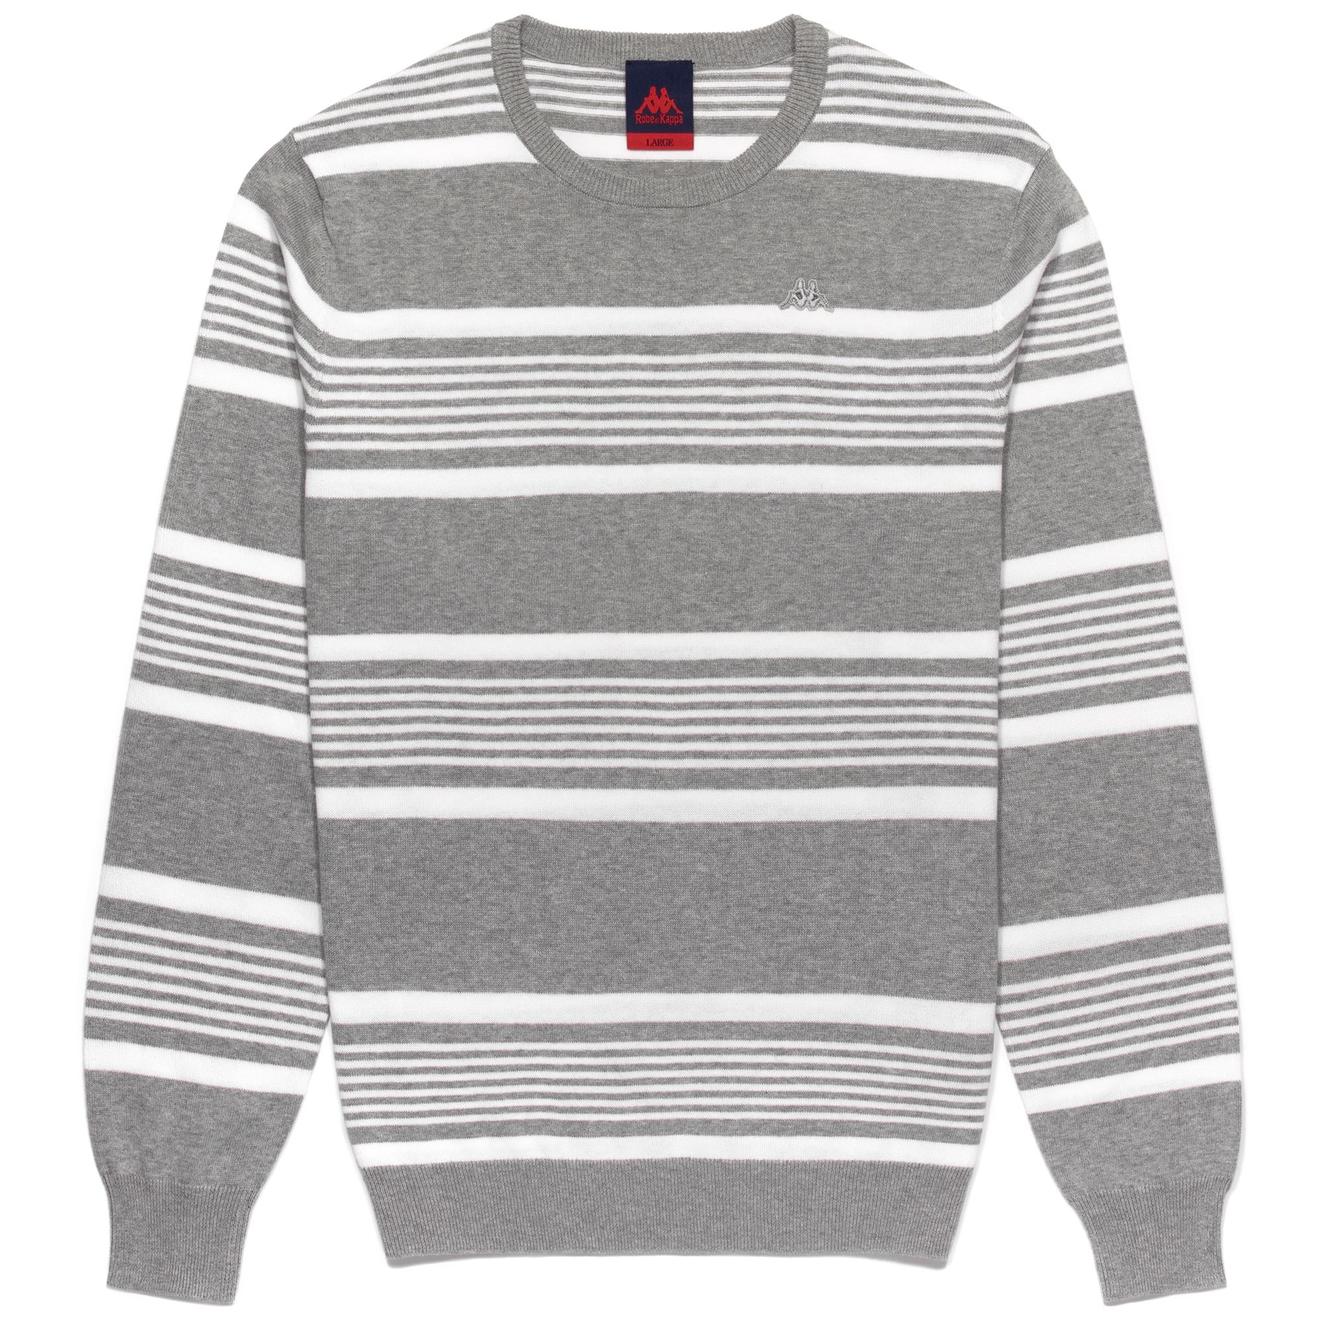 Offerta per ASTERIOS - Knitwear - Pull  Over - Man - GREY MD-WHITE a 38,5€ in Robe di Kappa